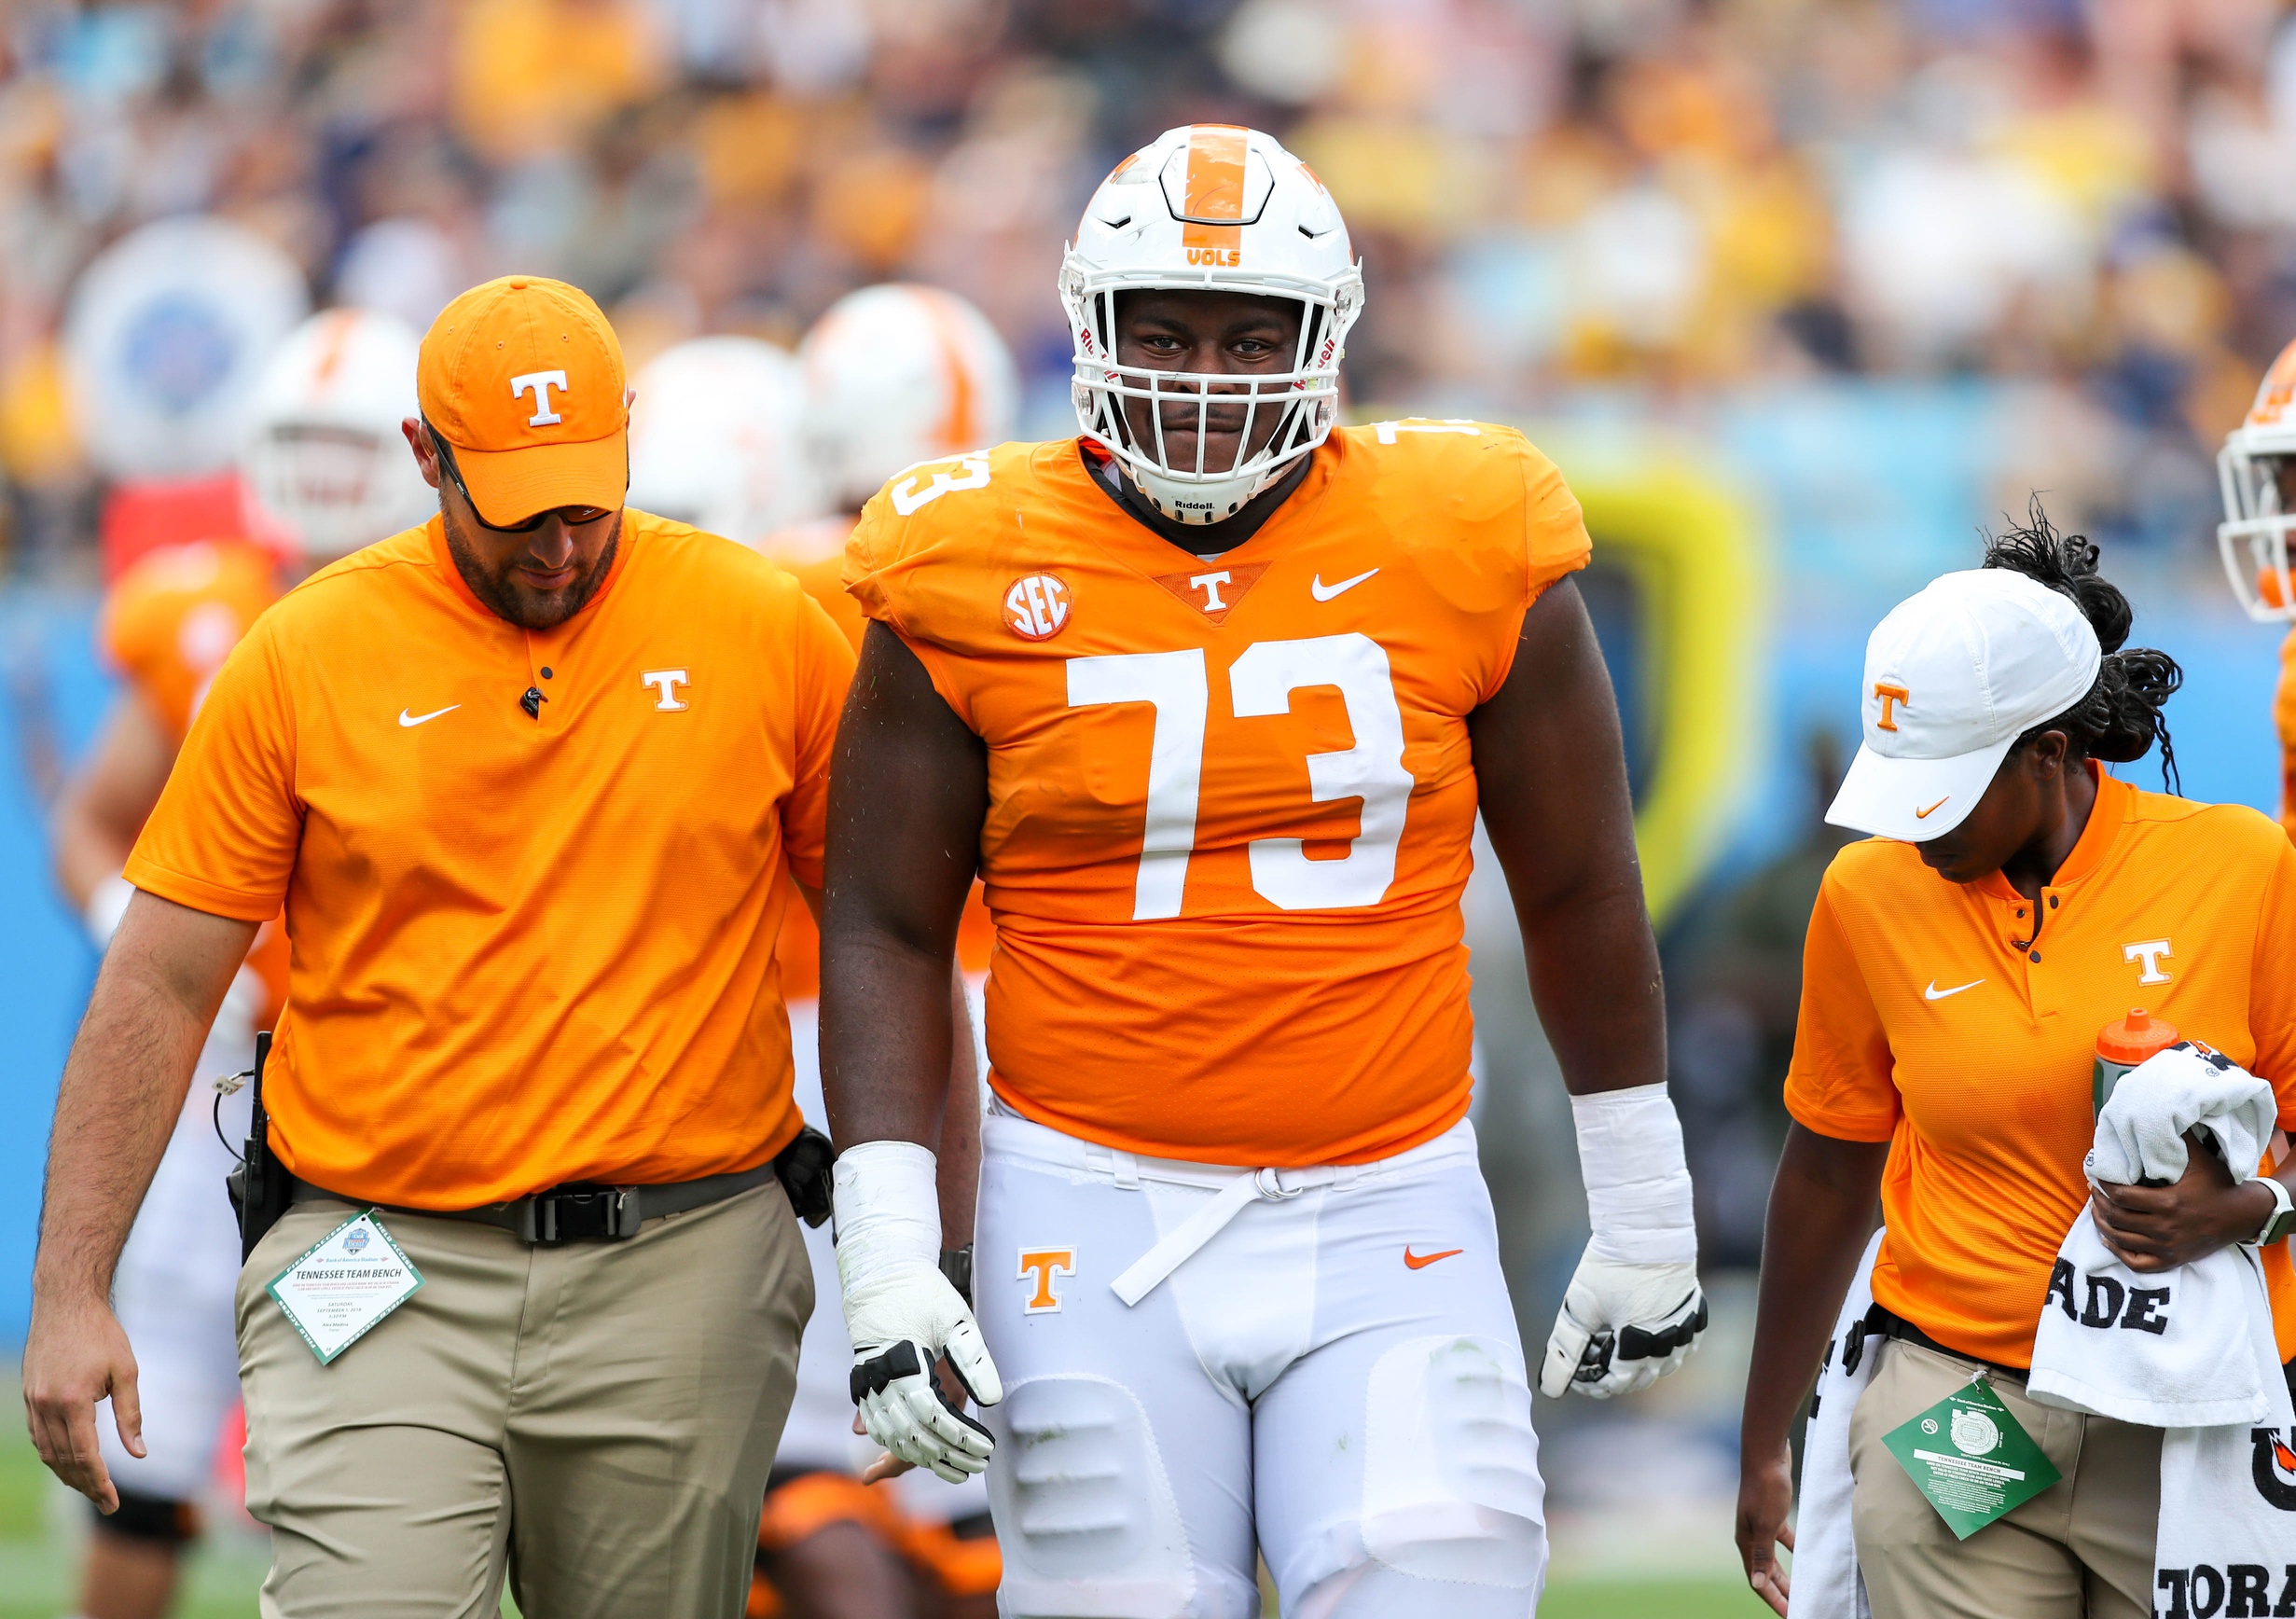 Pruitt Announces Trey Smith Will Be Out Indefinitely